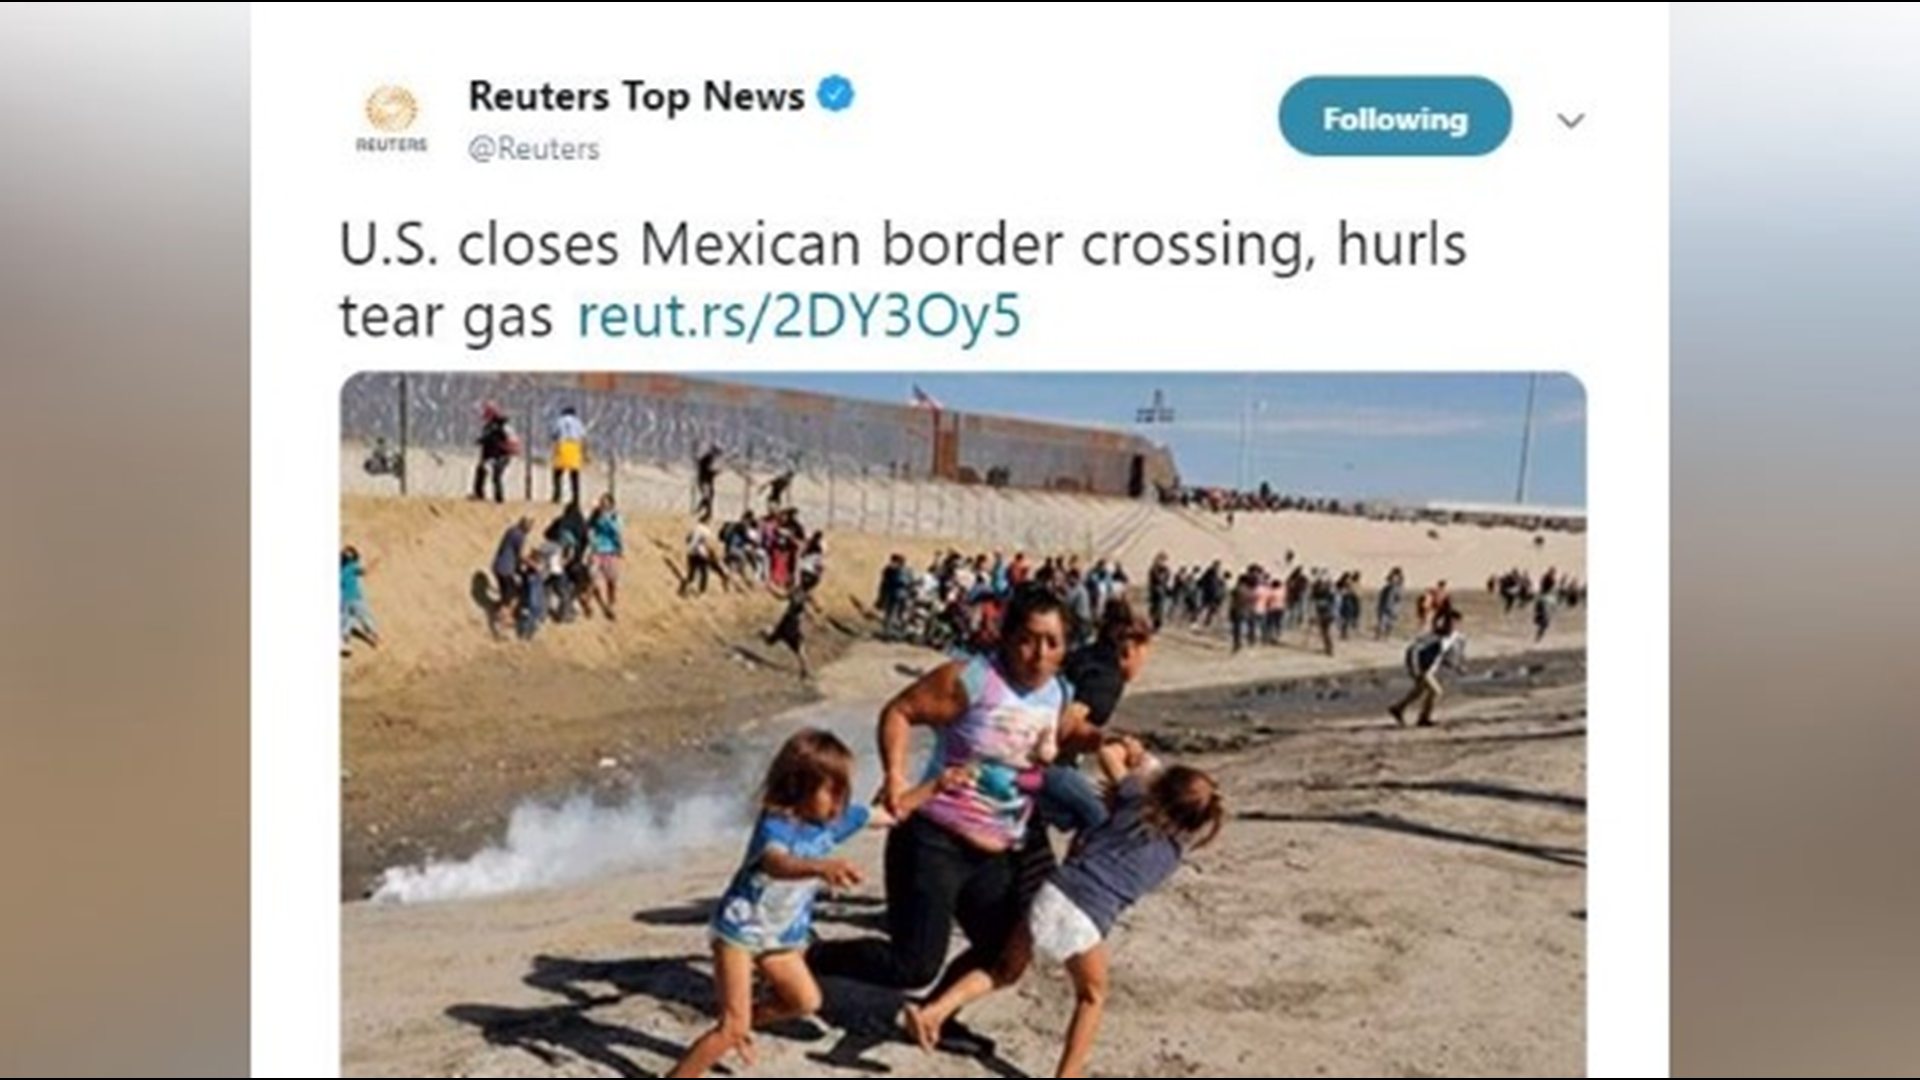 As the migrant caravan protest progressed on Sunday, several images sparked outrage online. Some from people claiming the images were fake.